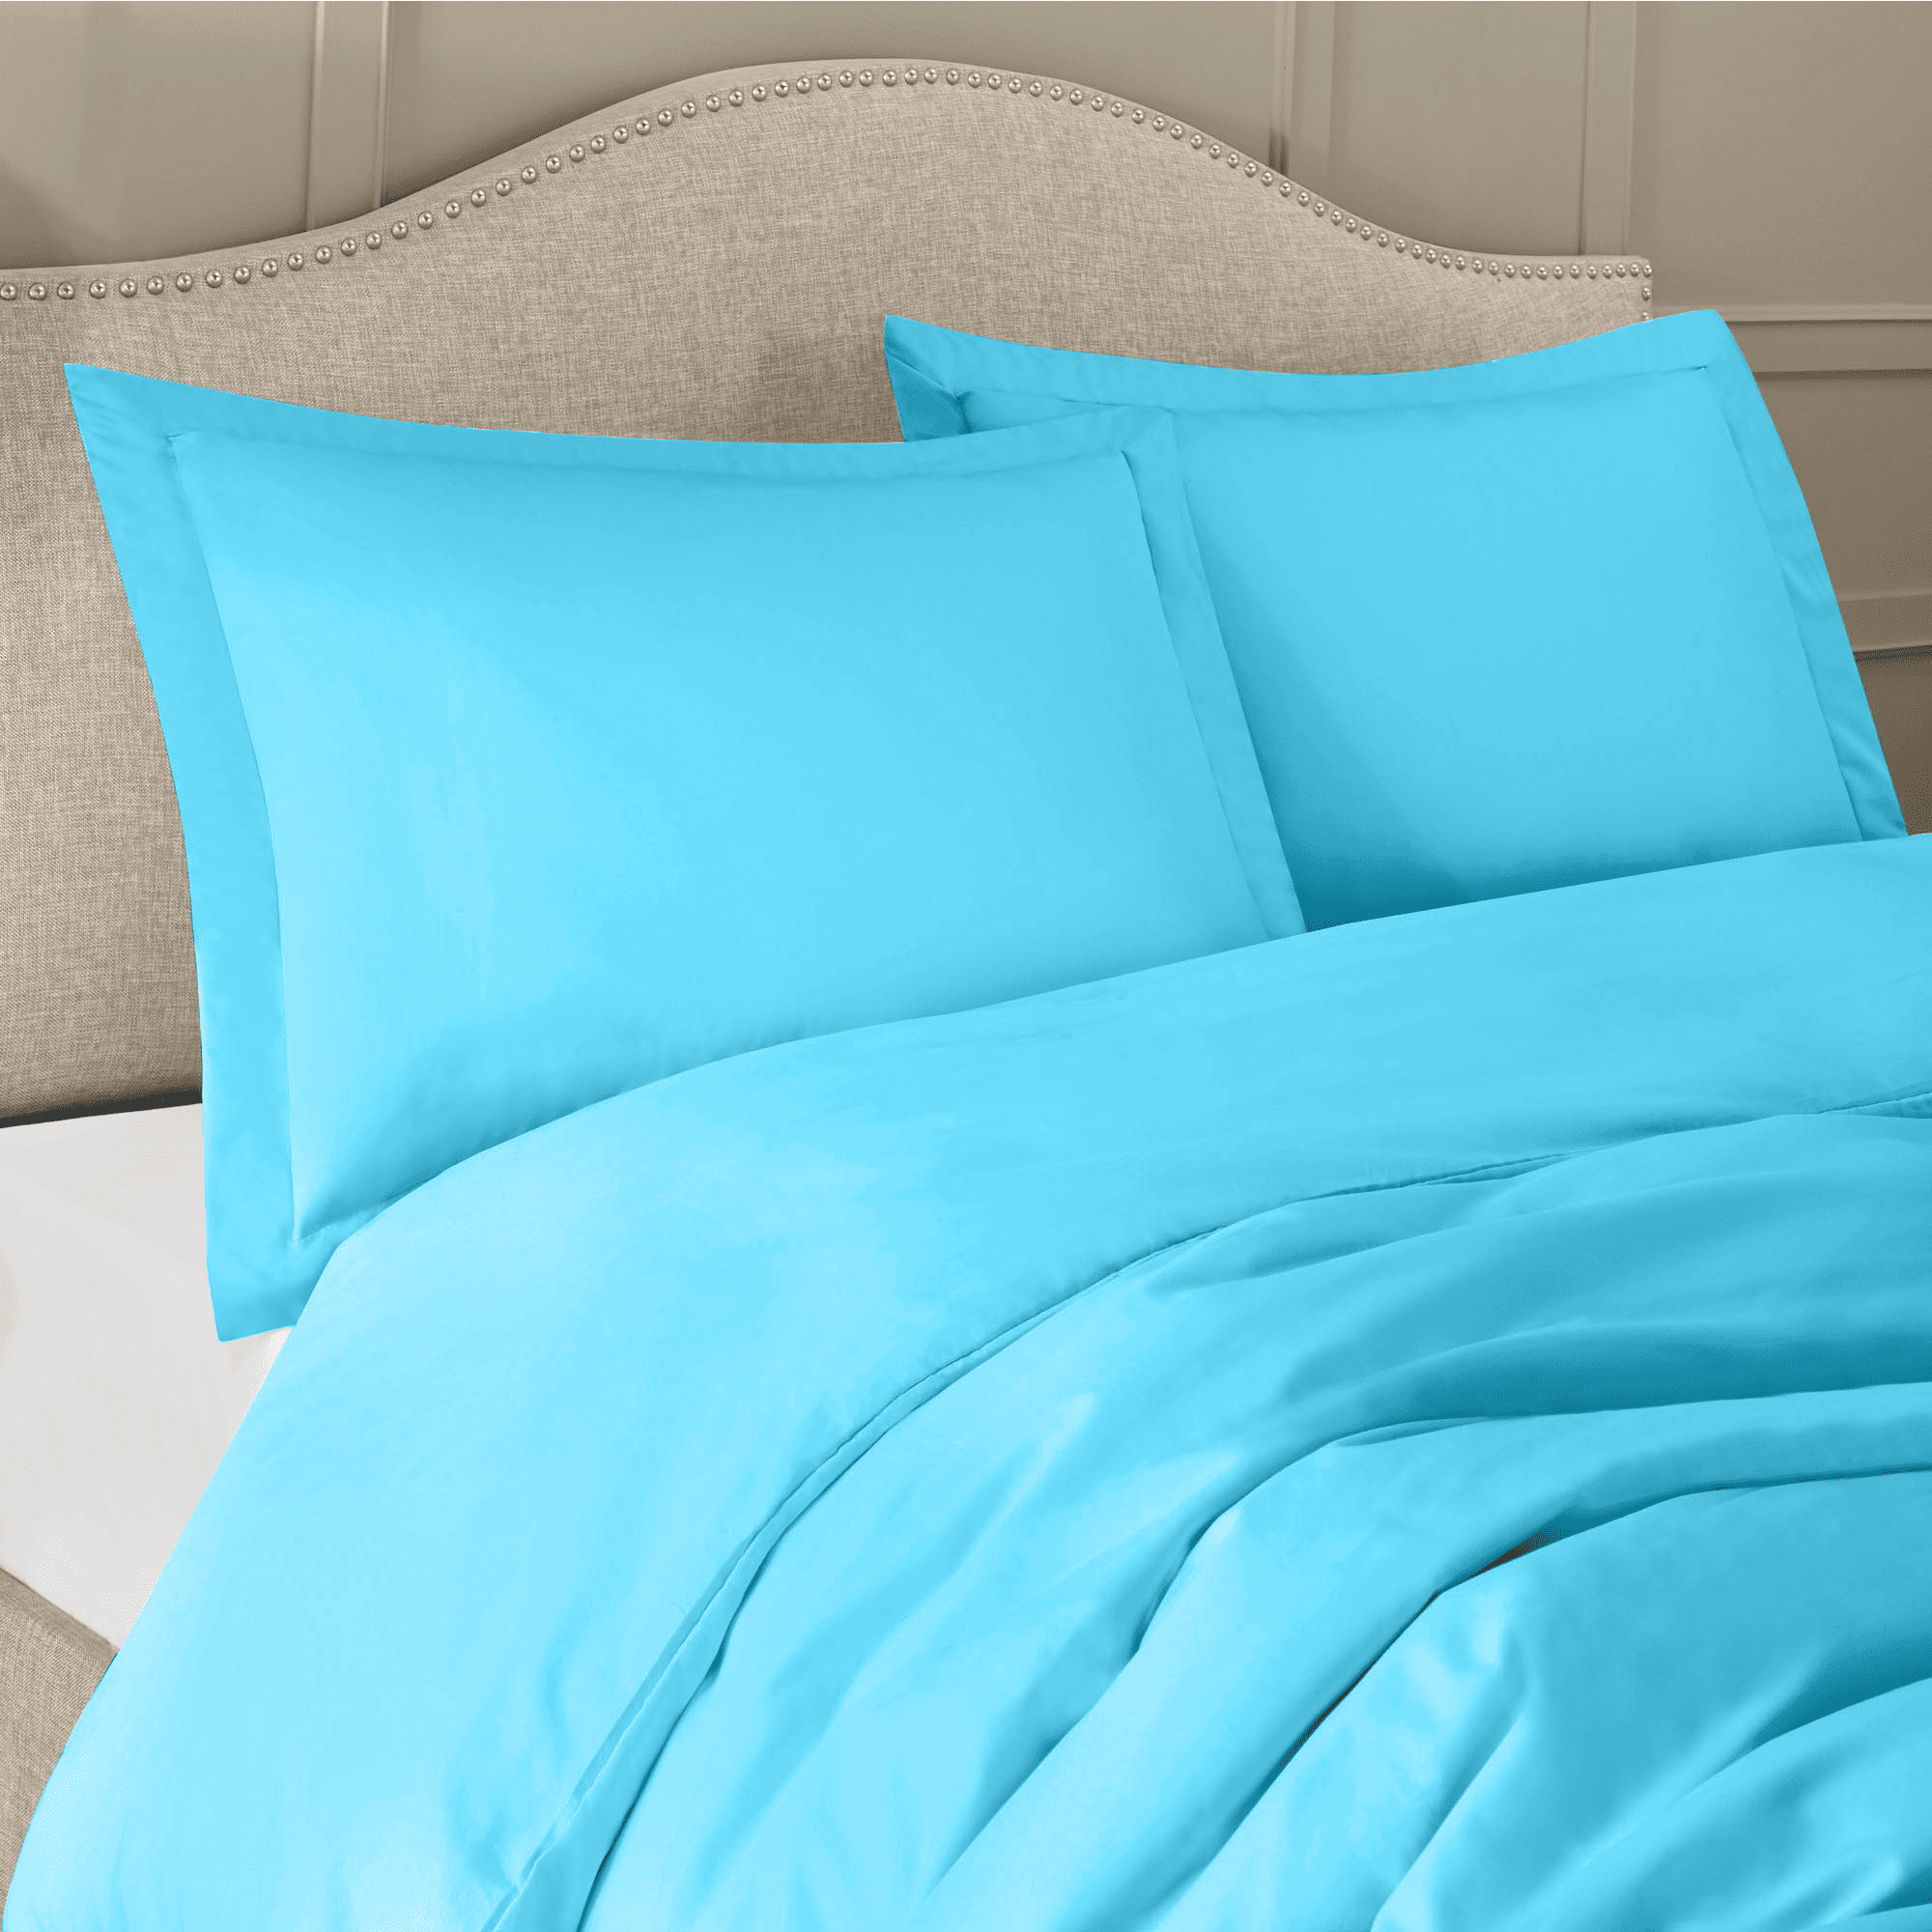 King Size 3 Piece Duvet Cover Set With, Beach King Size Duvet Covers Dunelm Mill